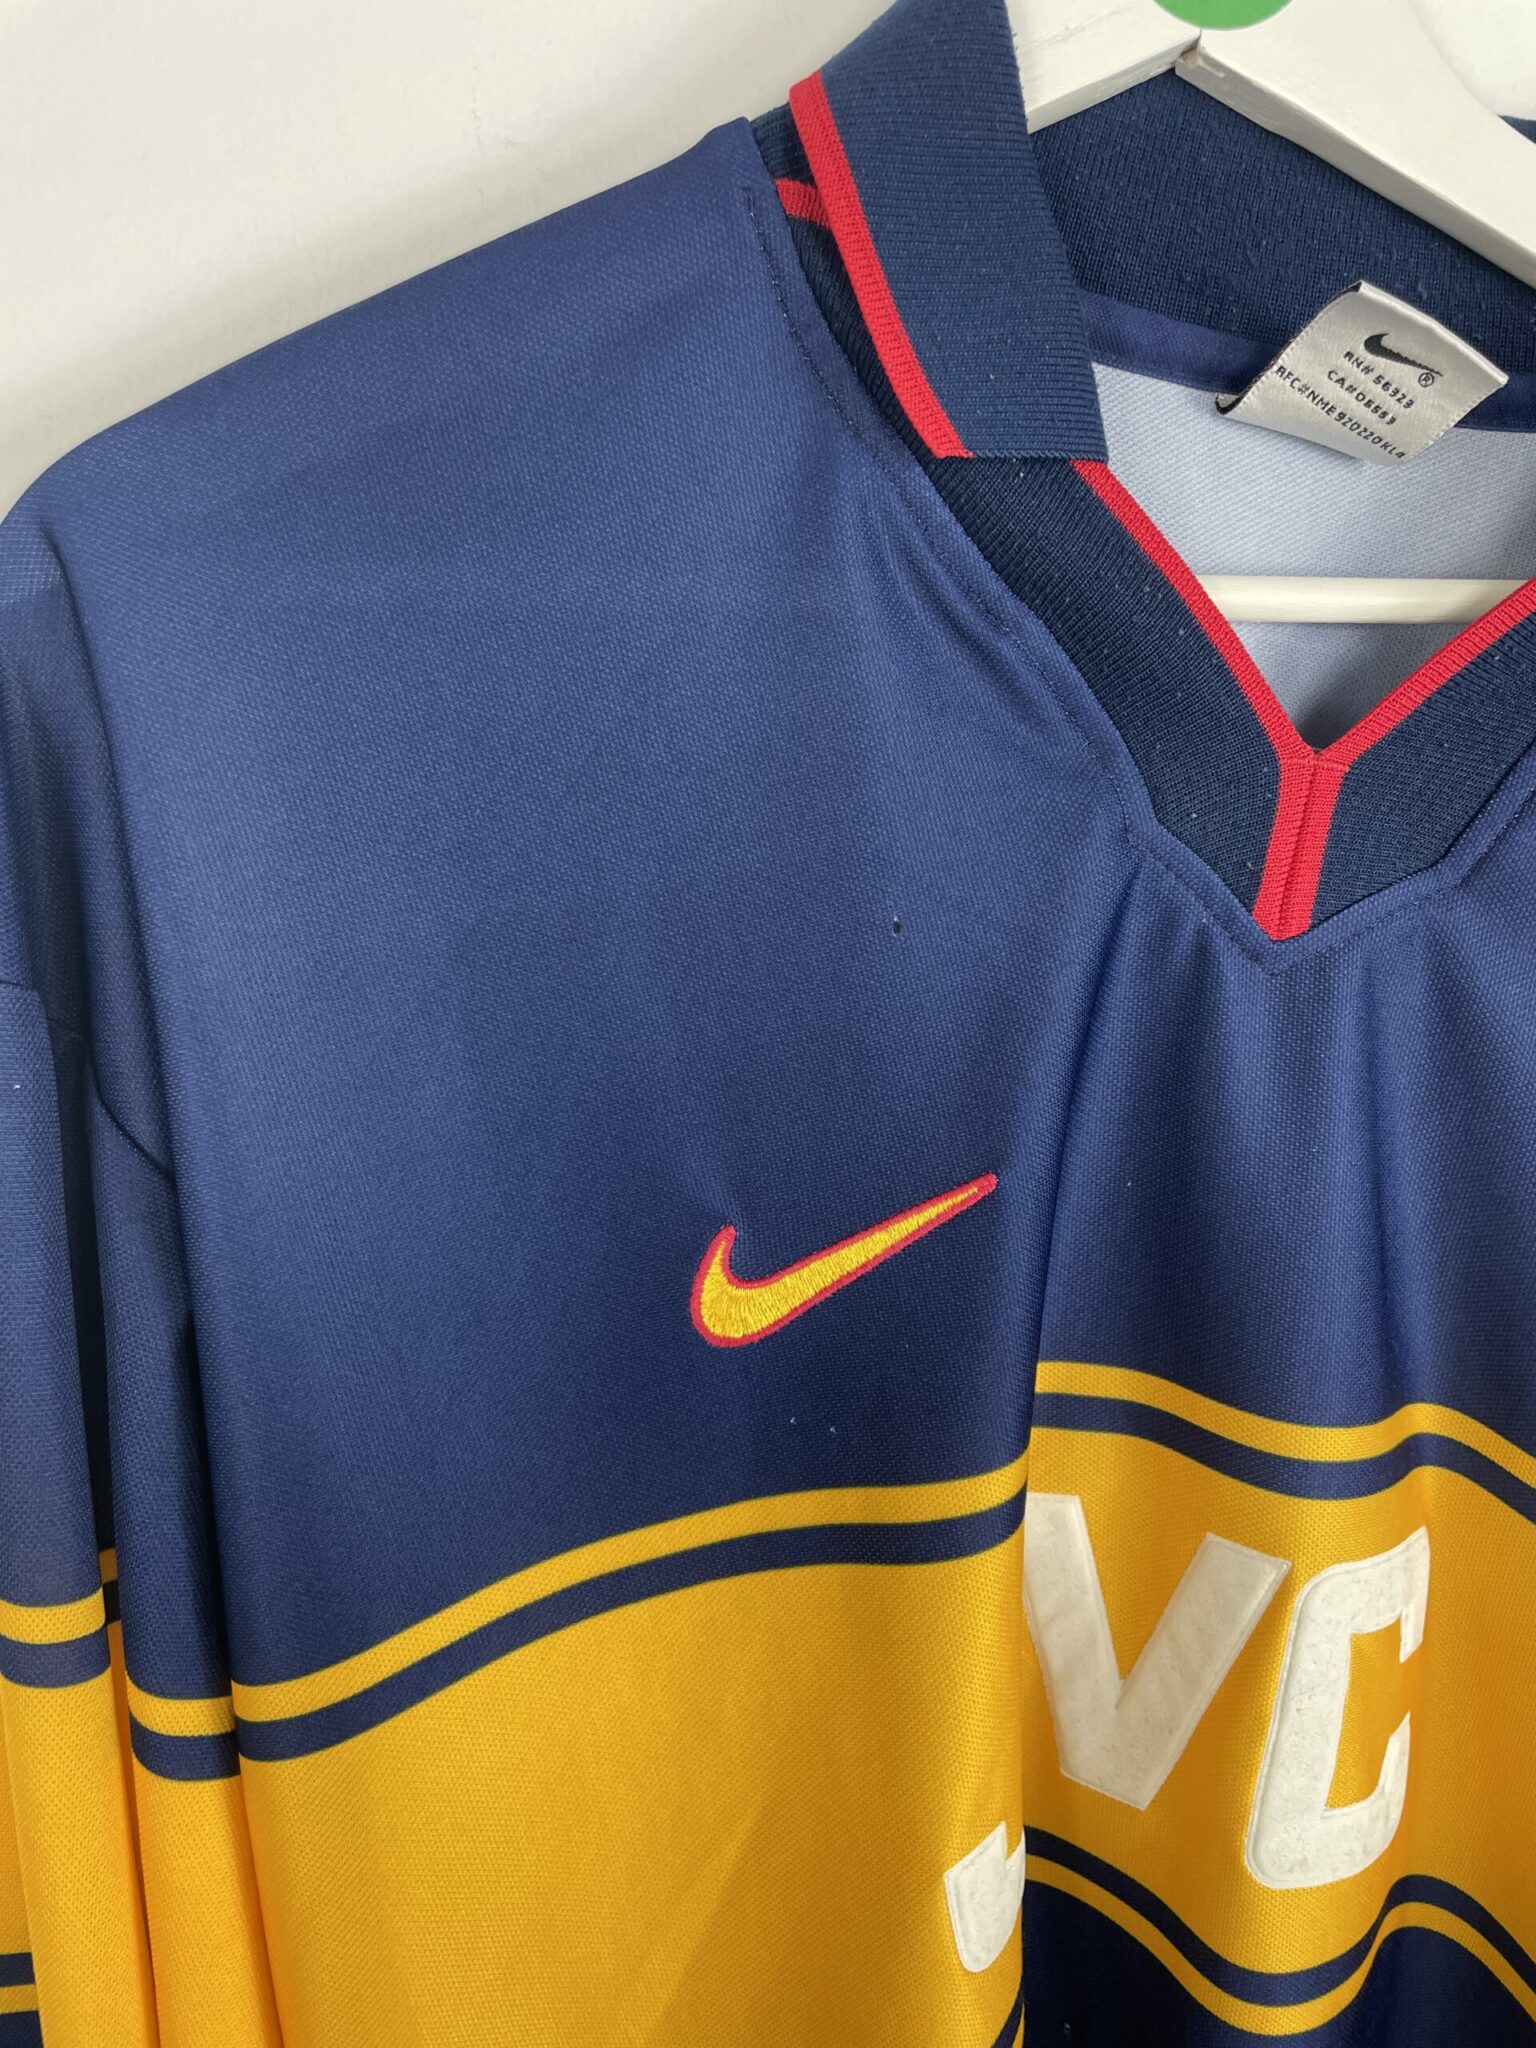 Retro Arsenal Home Jersey 1997 By Nike